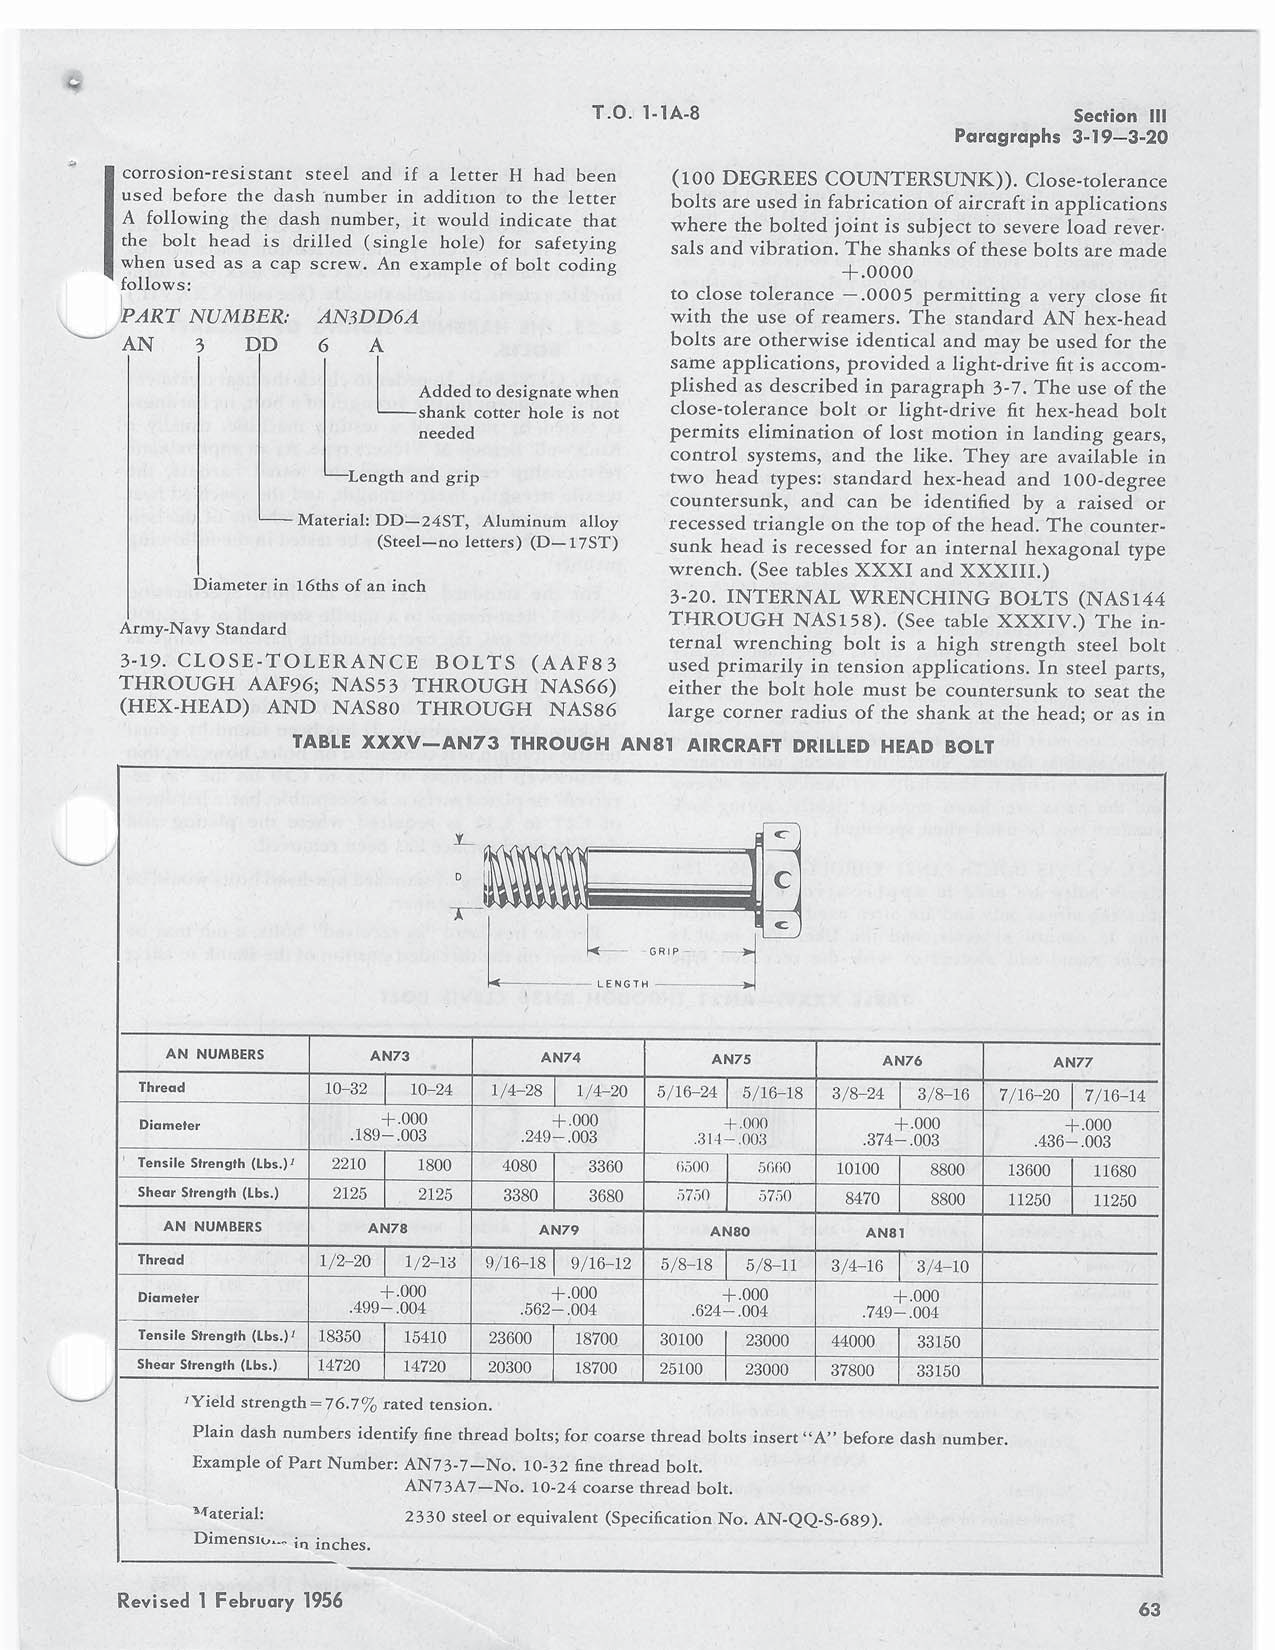 Sample page 73 from AirCorps Library document: General Aircraft Structural Hardware